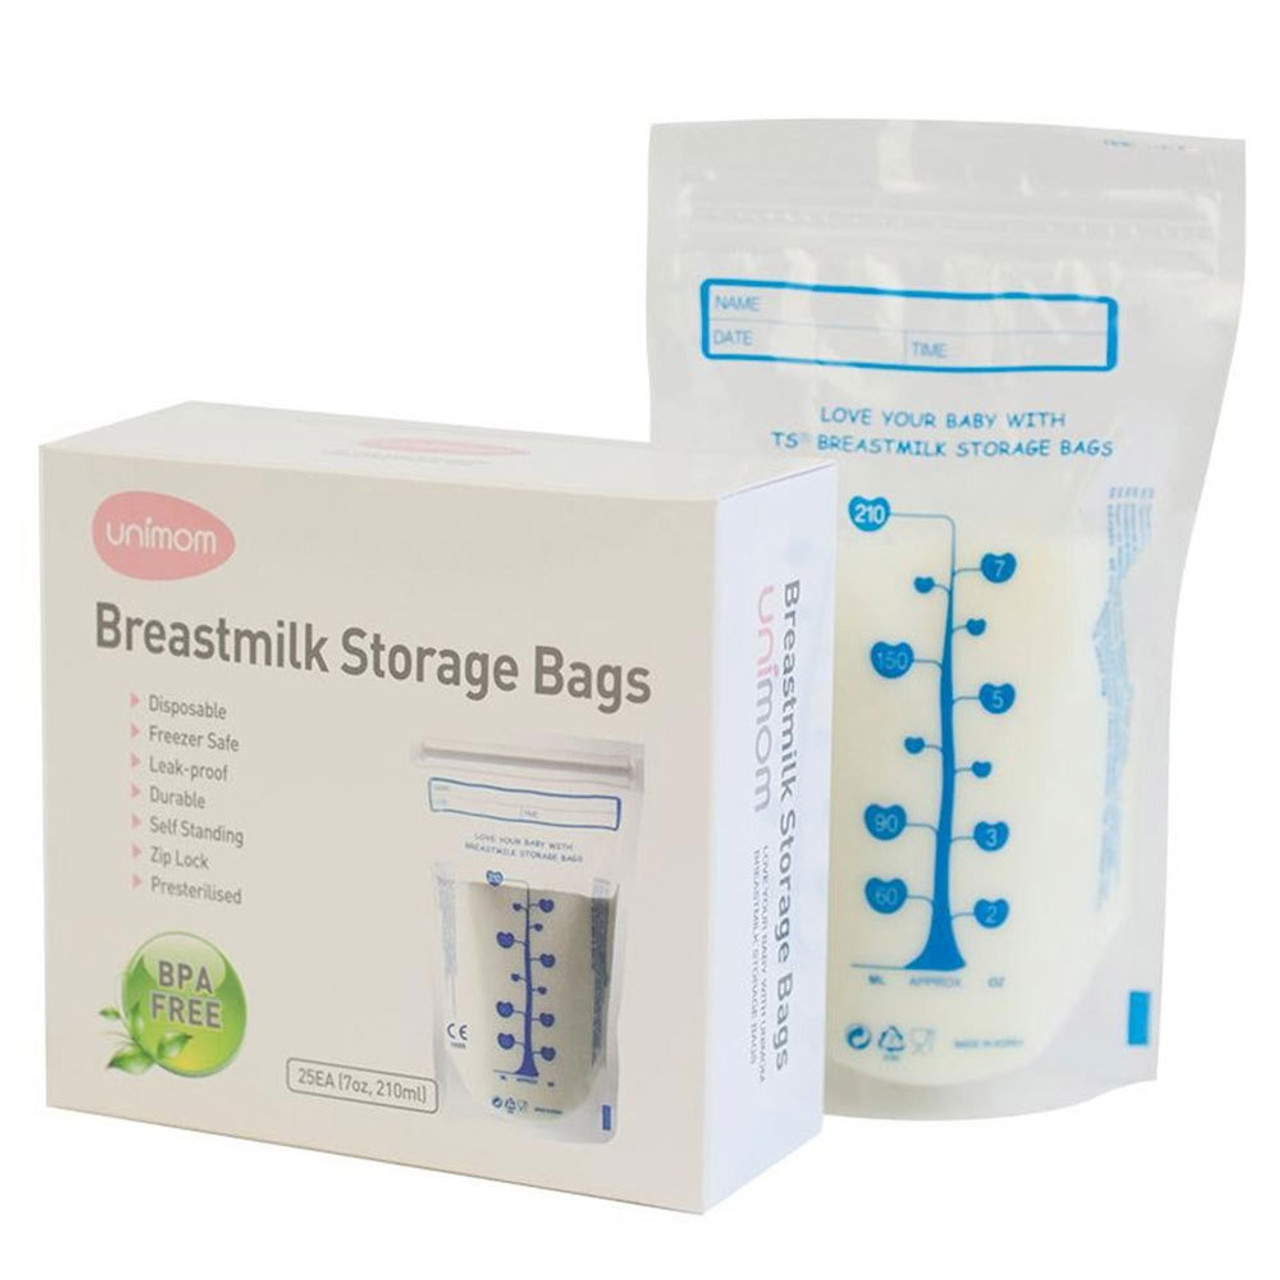 Pur PreSterilized Breast Milk Storage Bags 50 Pieces 250 ml each Online in  India Buy at Best Price from Firstcrycom  3675748